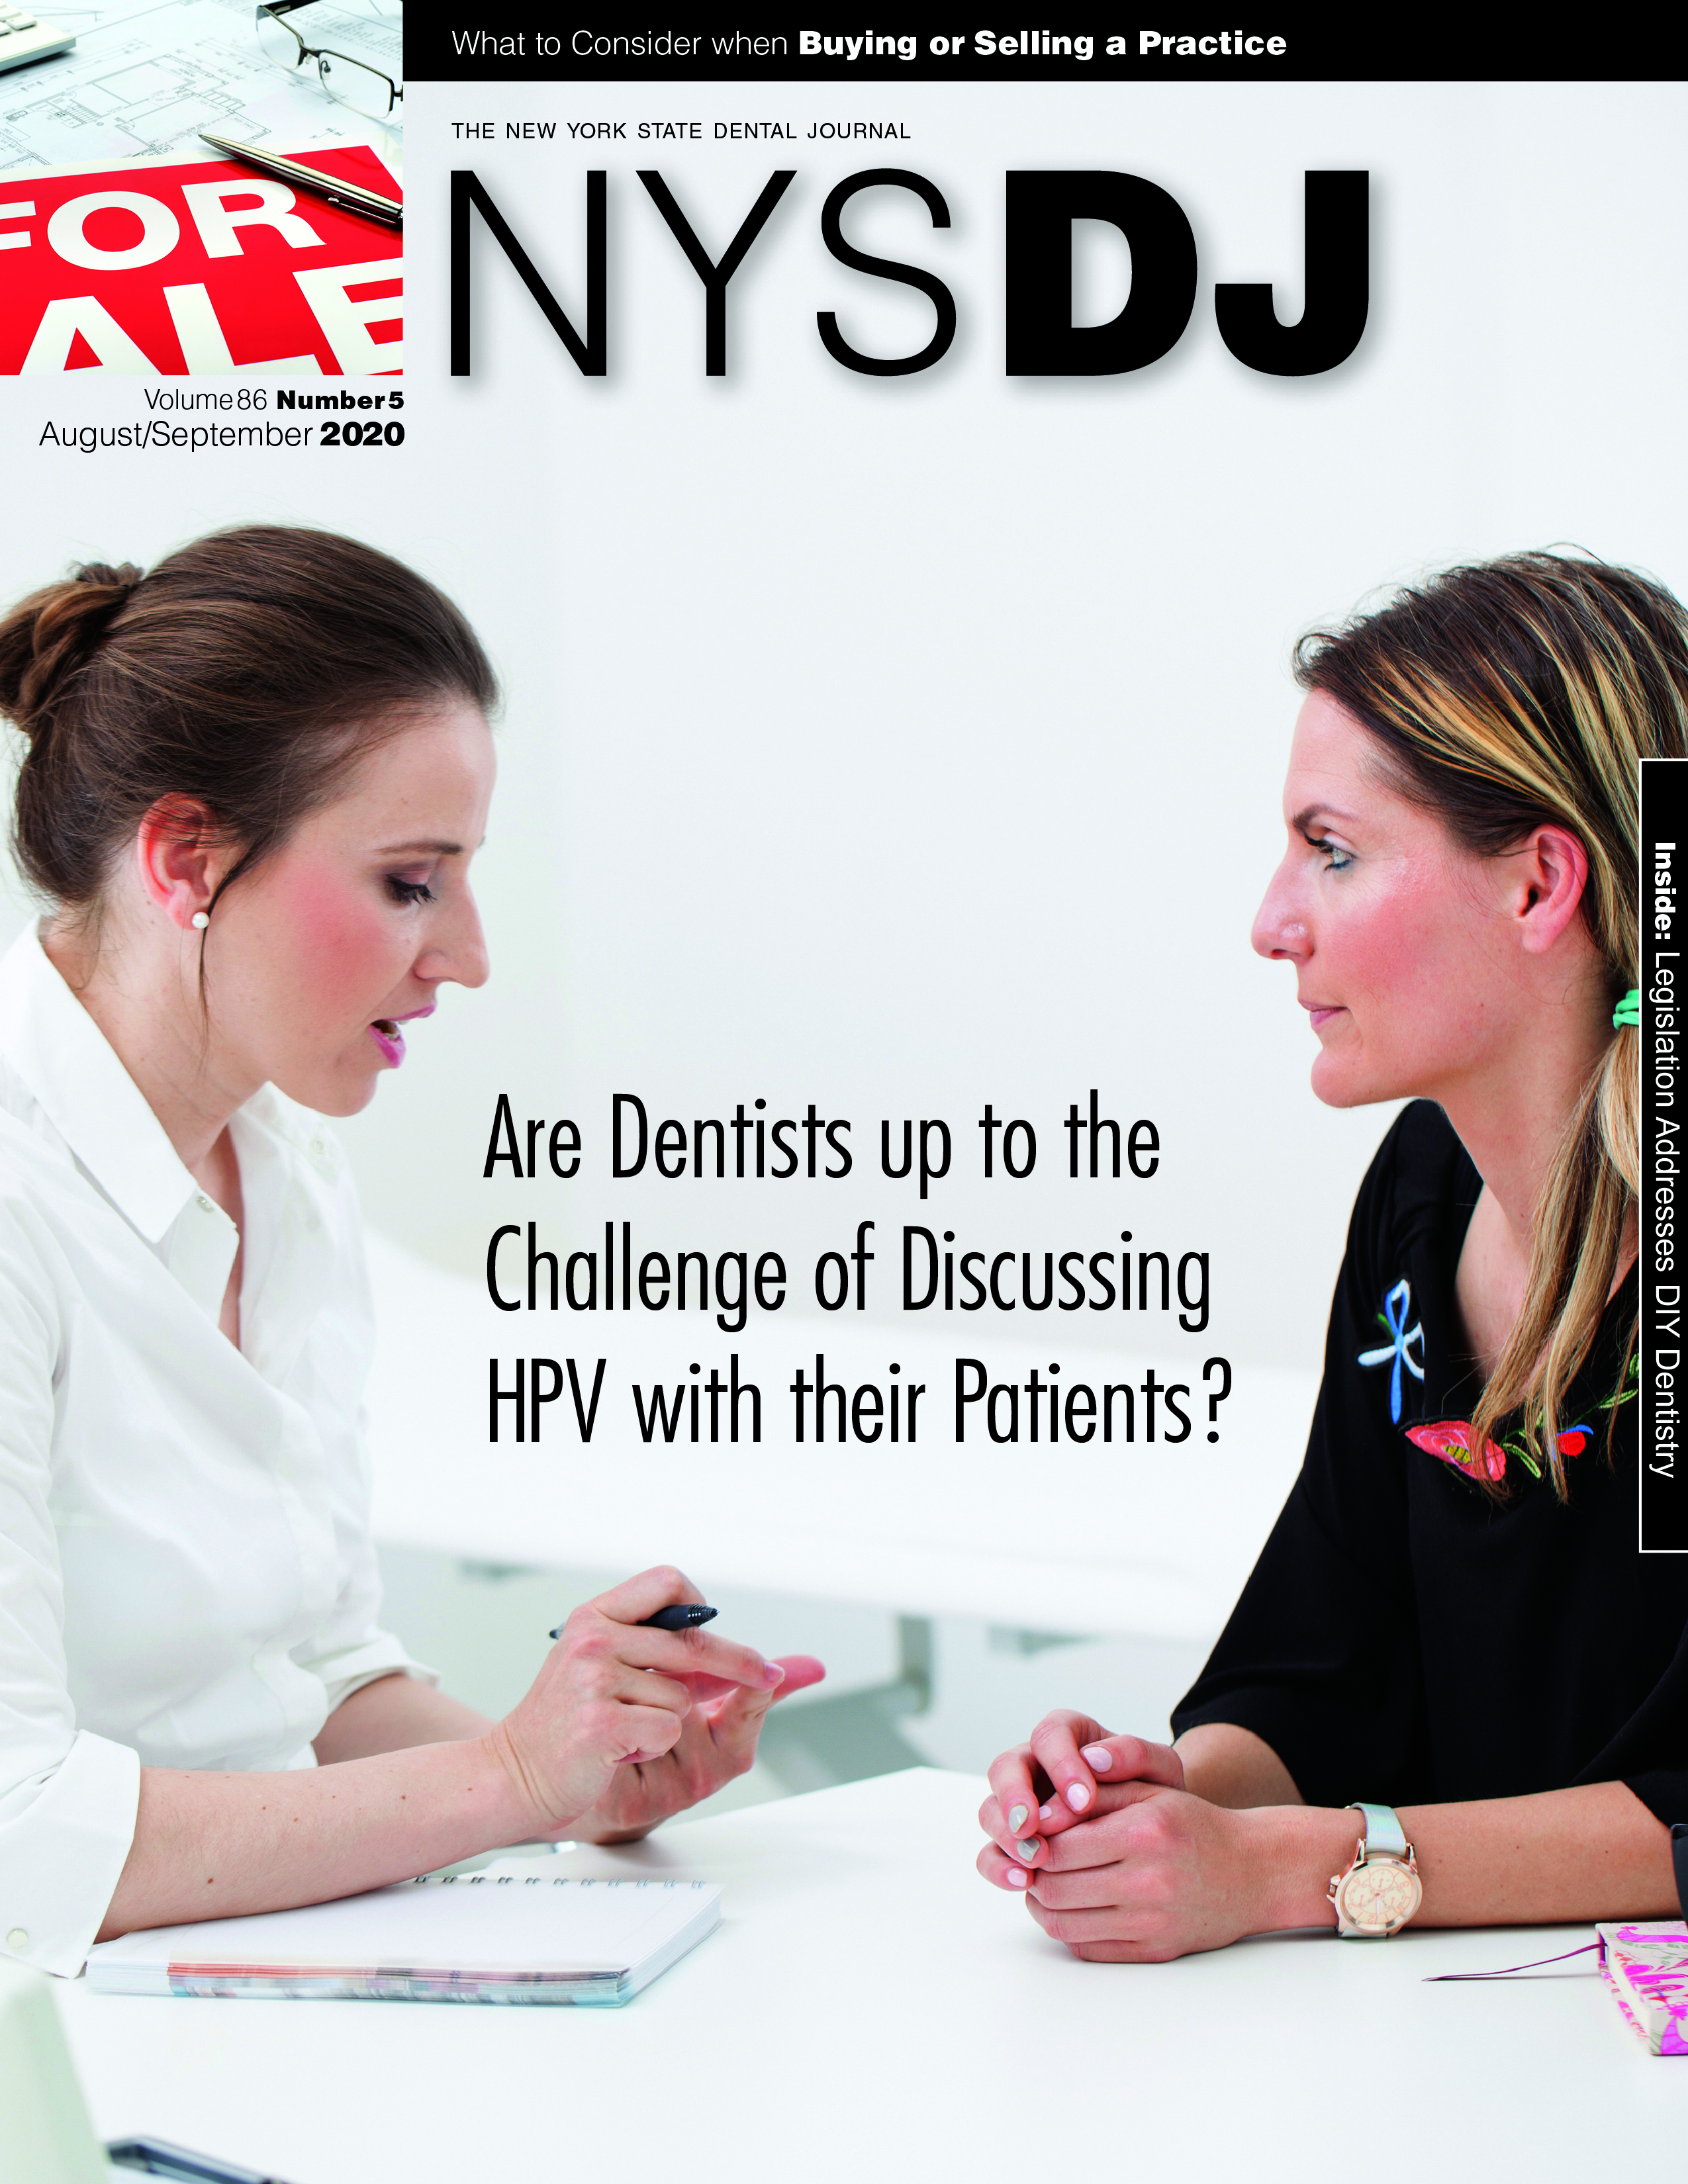 Cover of the NYSDJ with two people sitting at a table talking. One is in a white coat